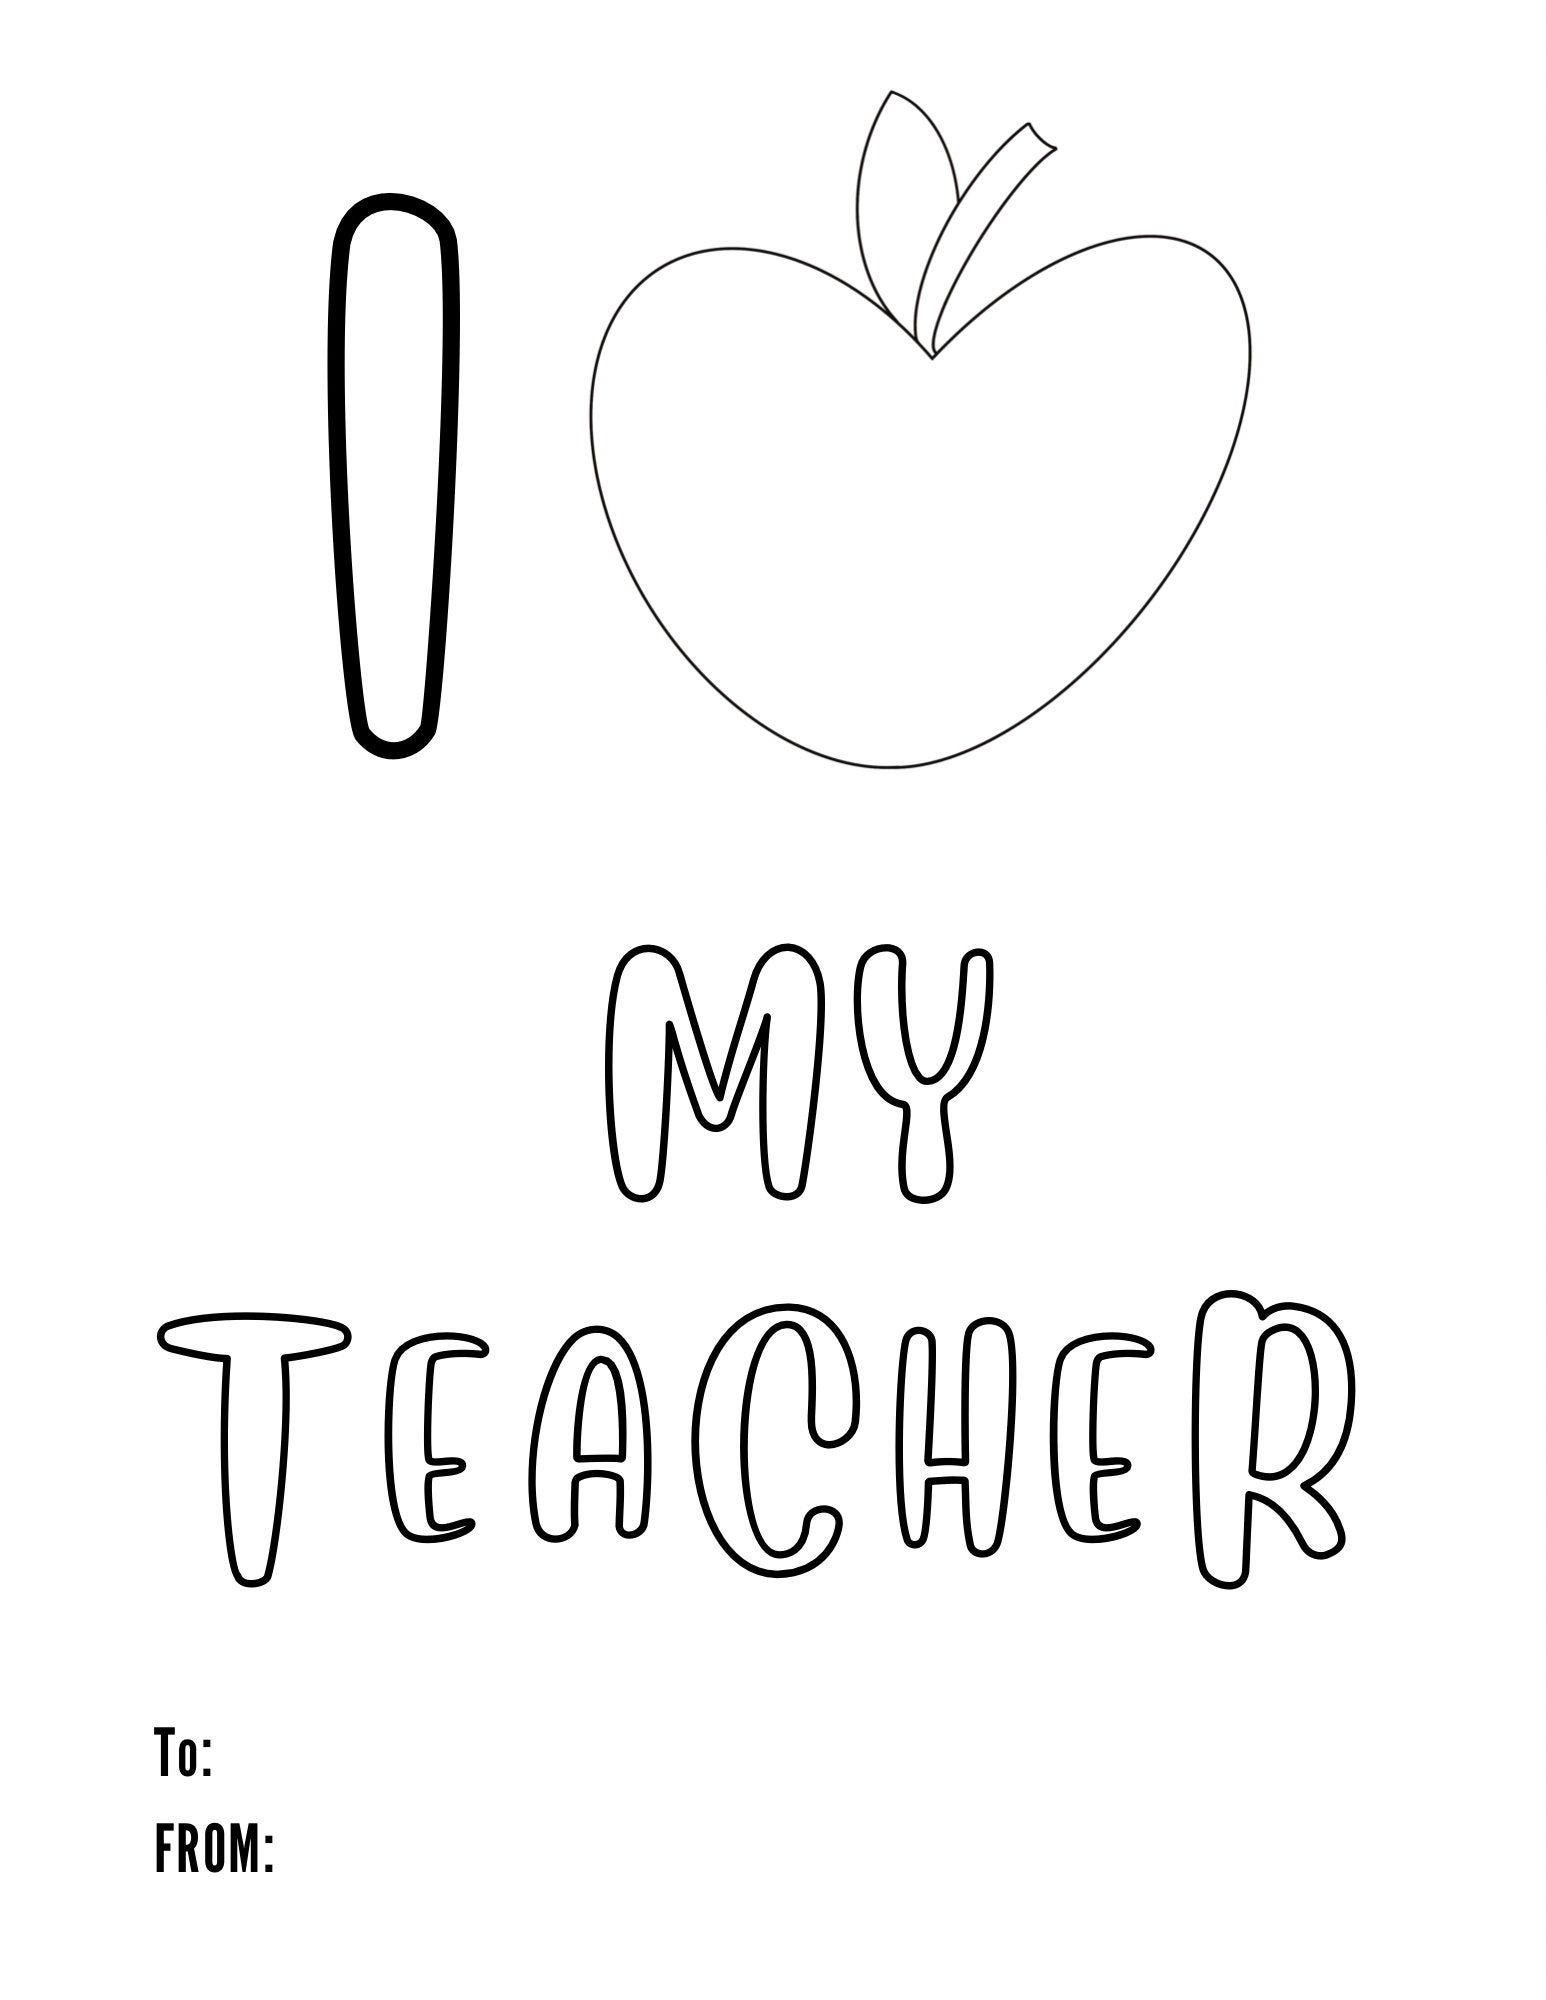 I Love My Teacher Coloring Page Letter Card. Thank You Card - Etsy